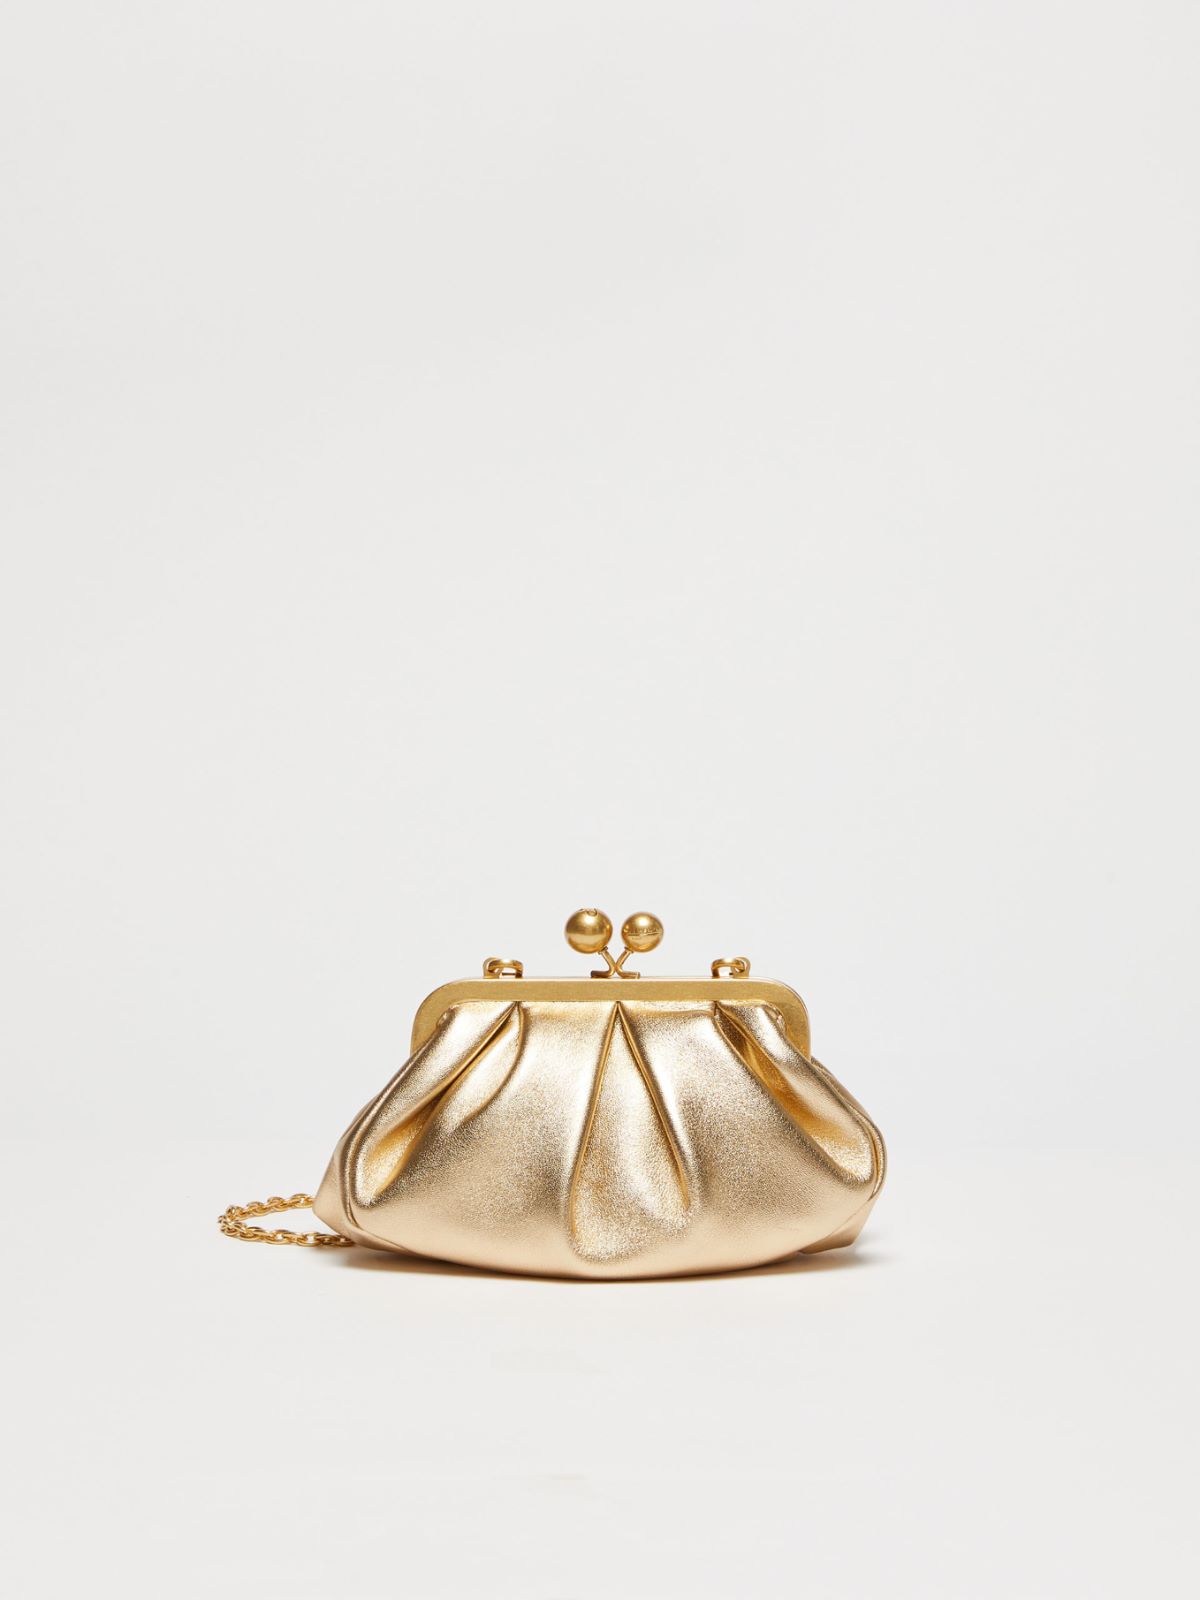 Small Pasticcino Bag in laminated nappa leather - GOLD - Weekend Max Mara